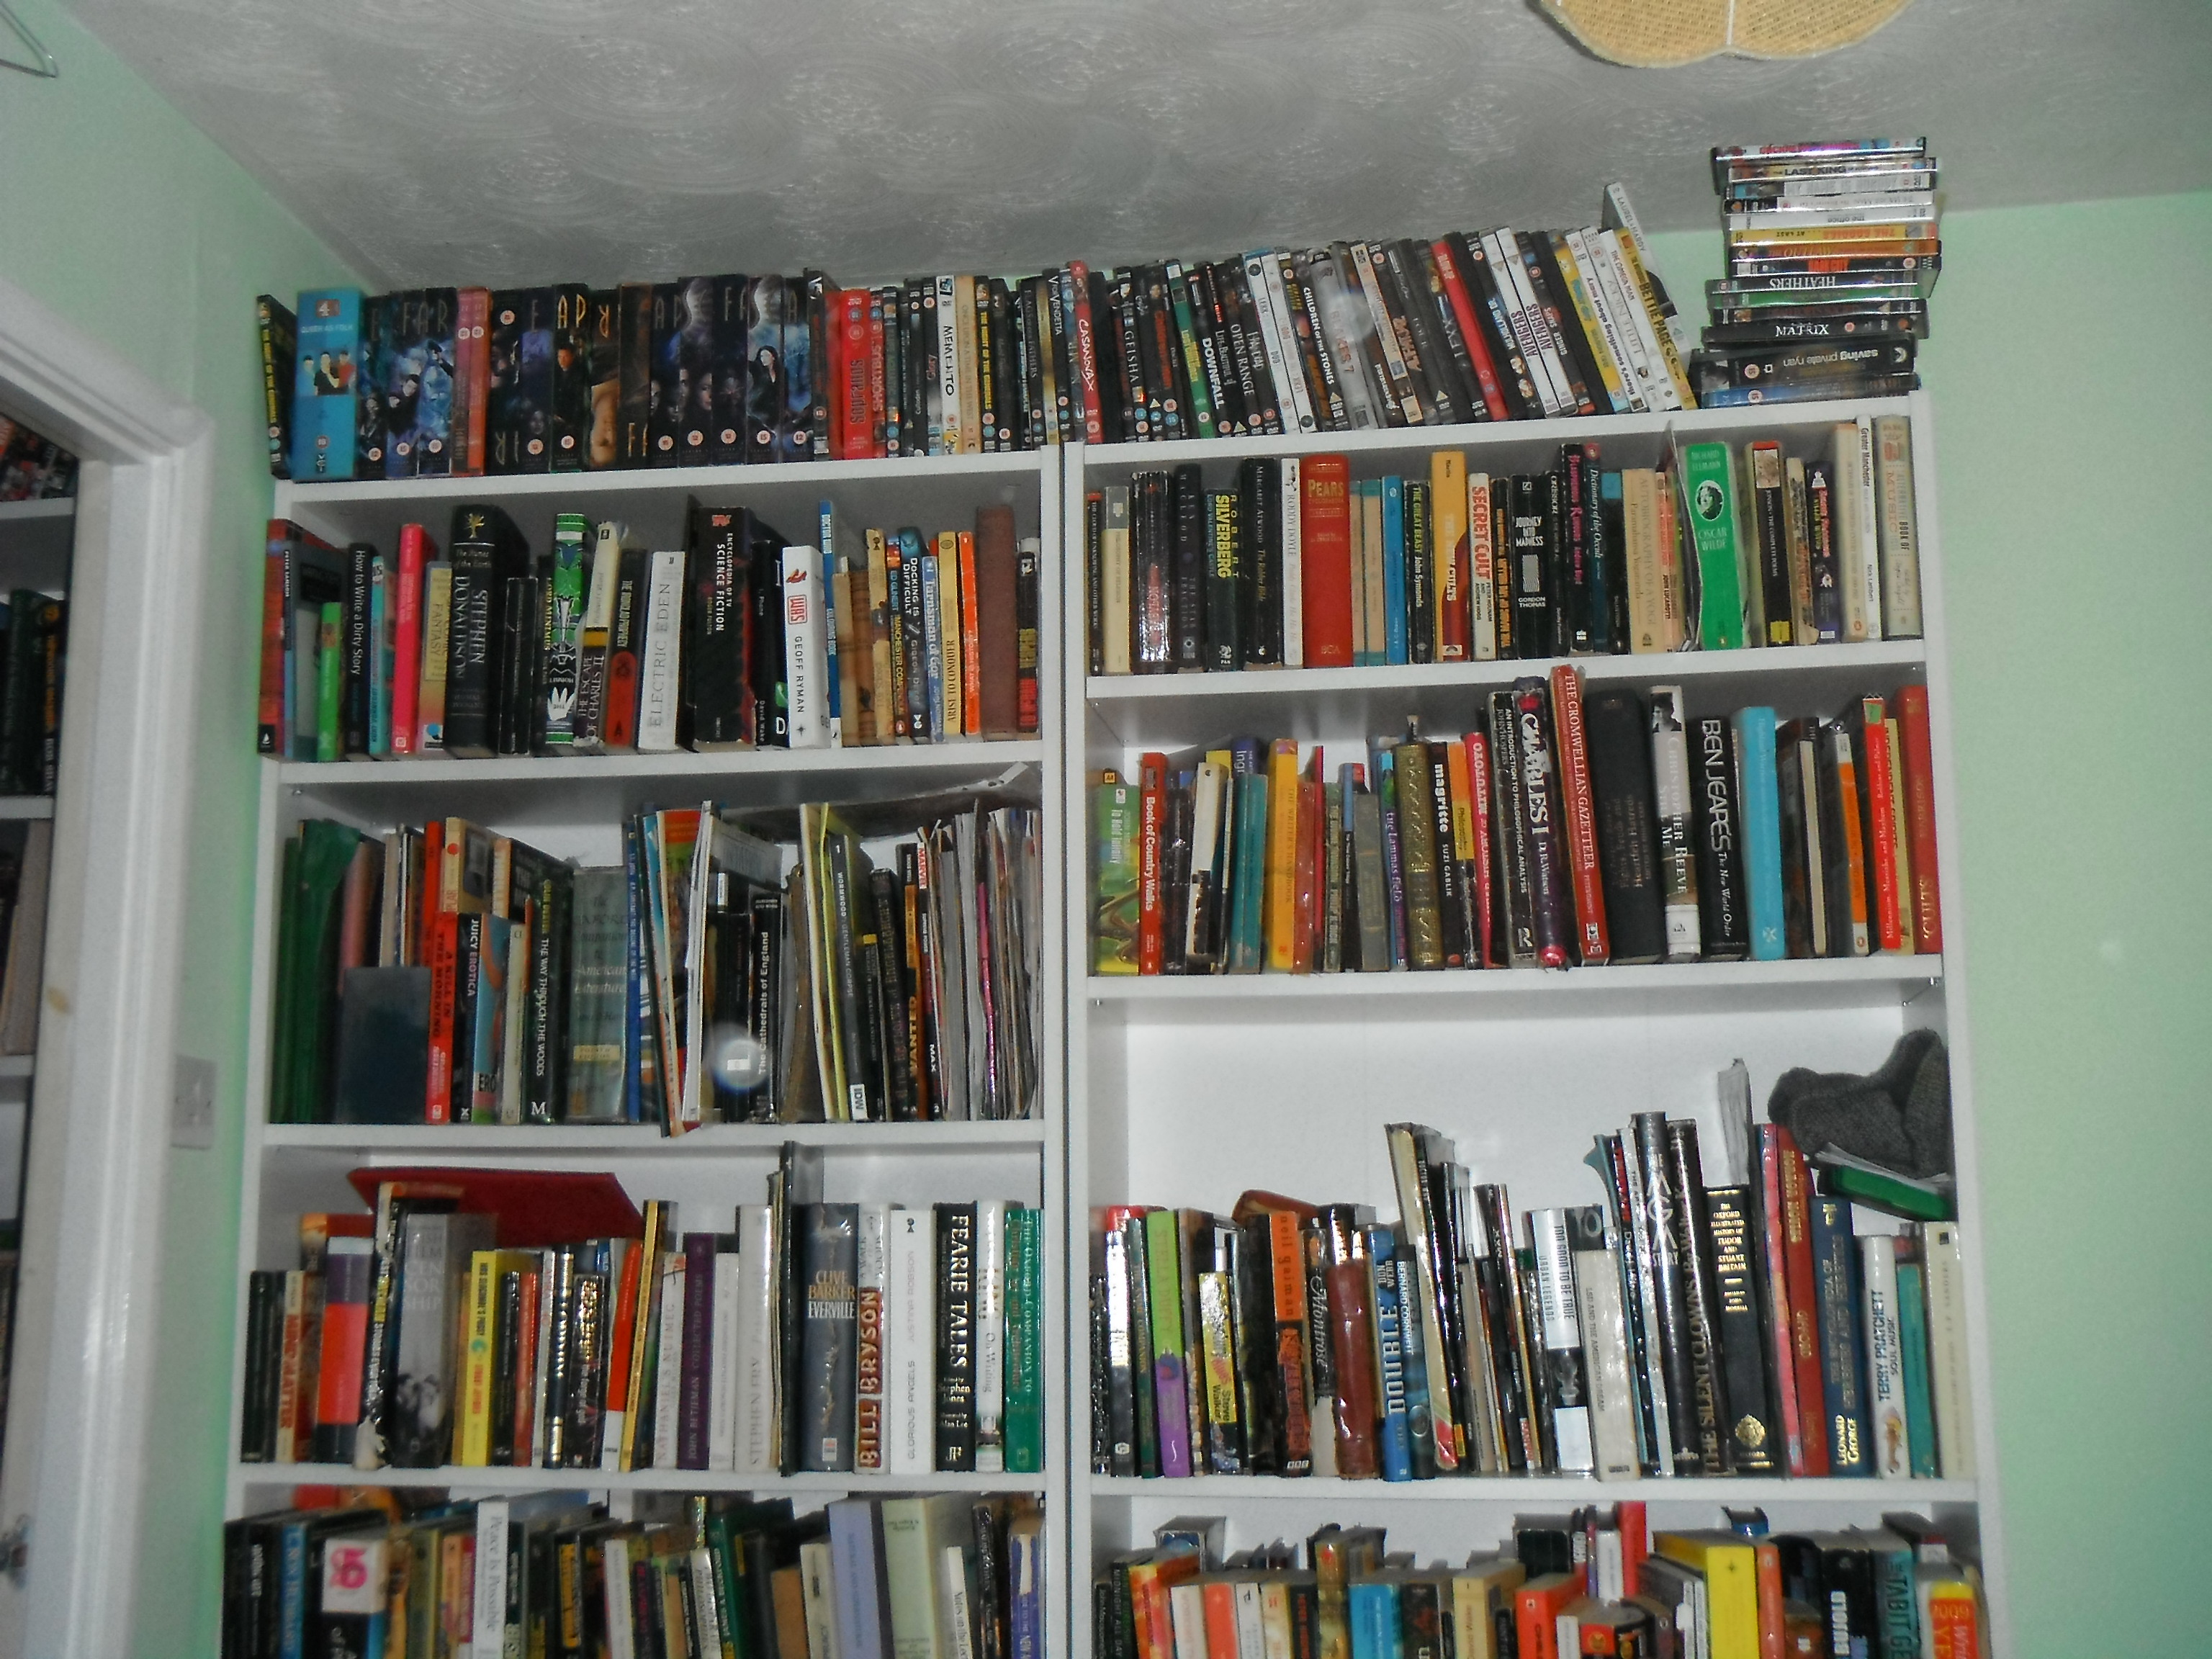  Photo taken by me – my book cases 